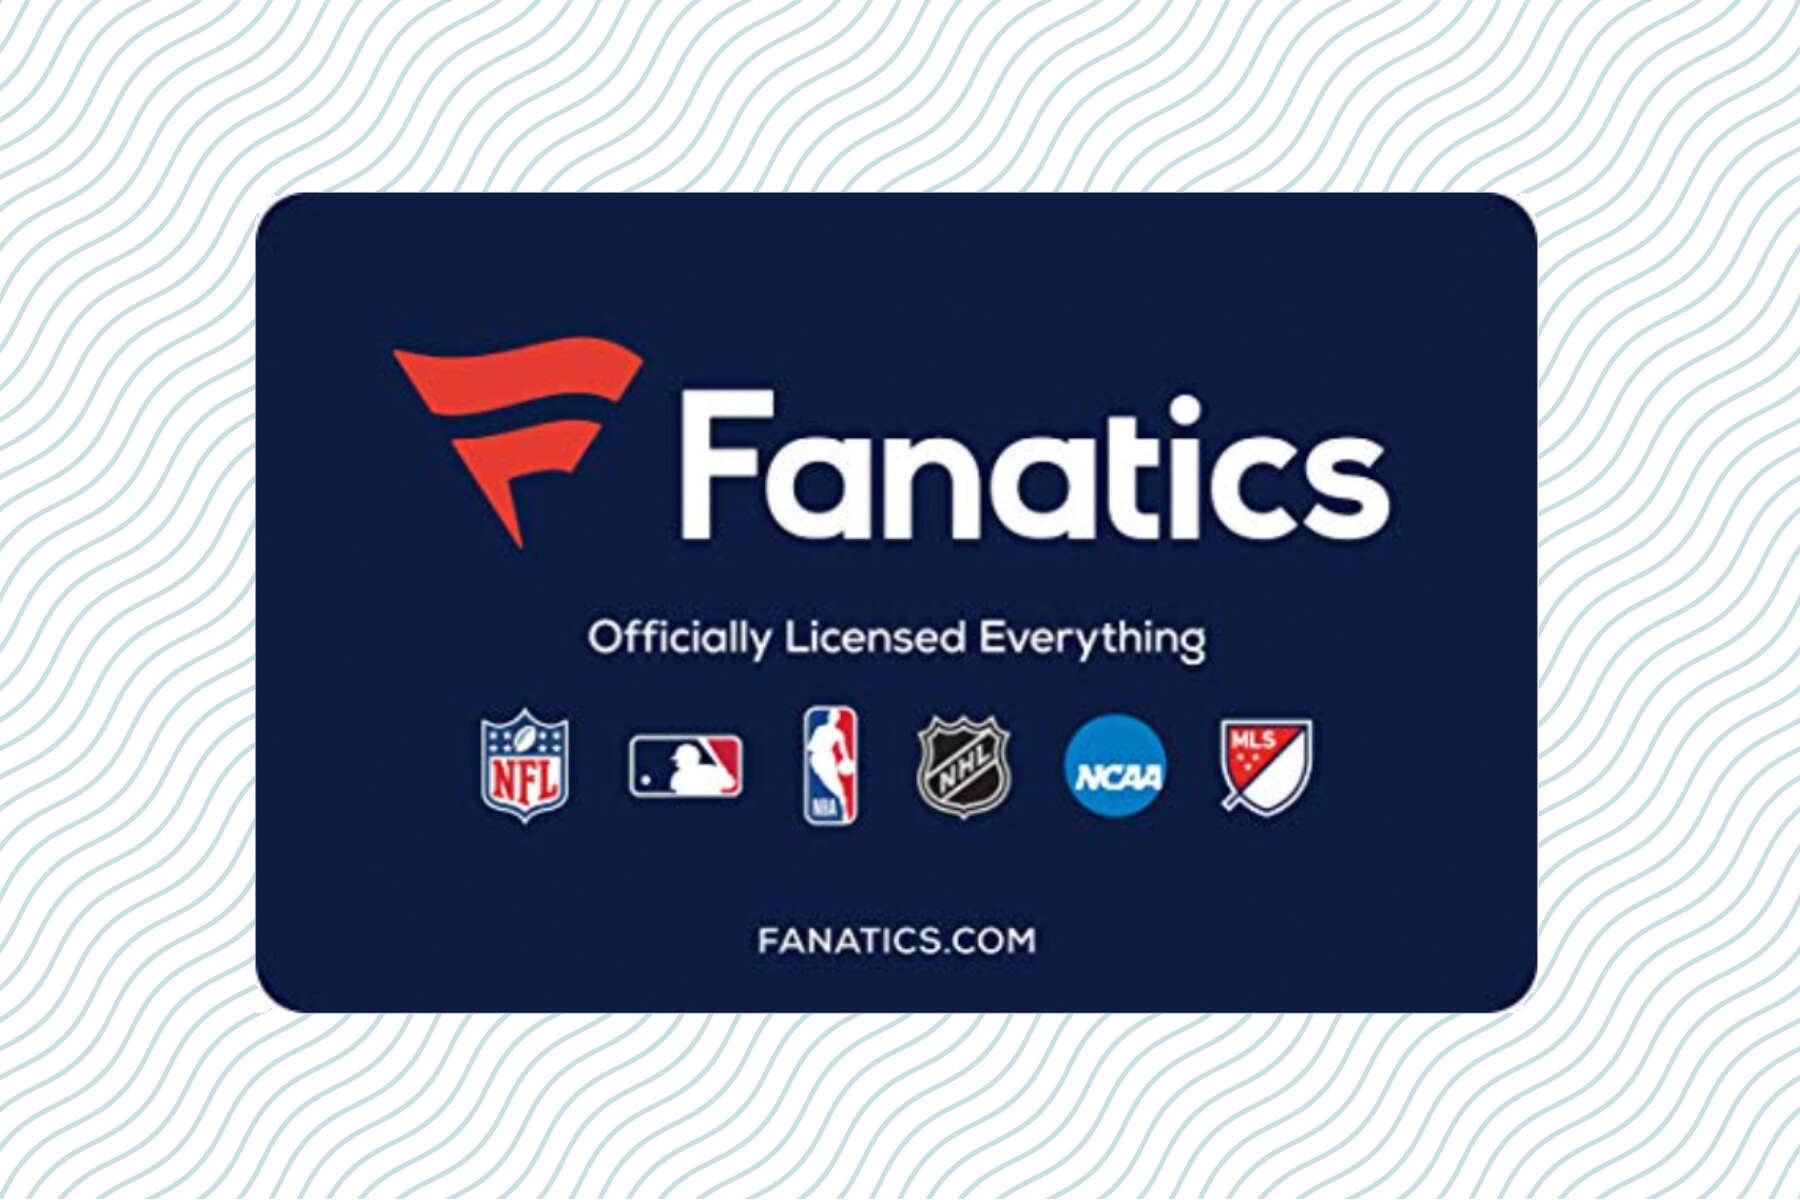 Nordstrom and Fanatics Partner To Sell Licensed Sports Products